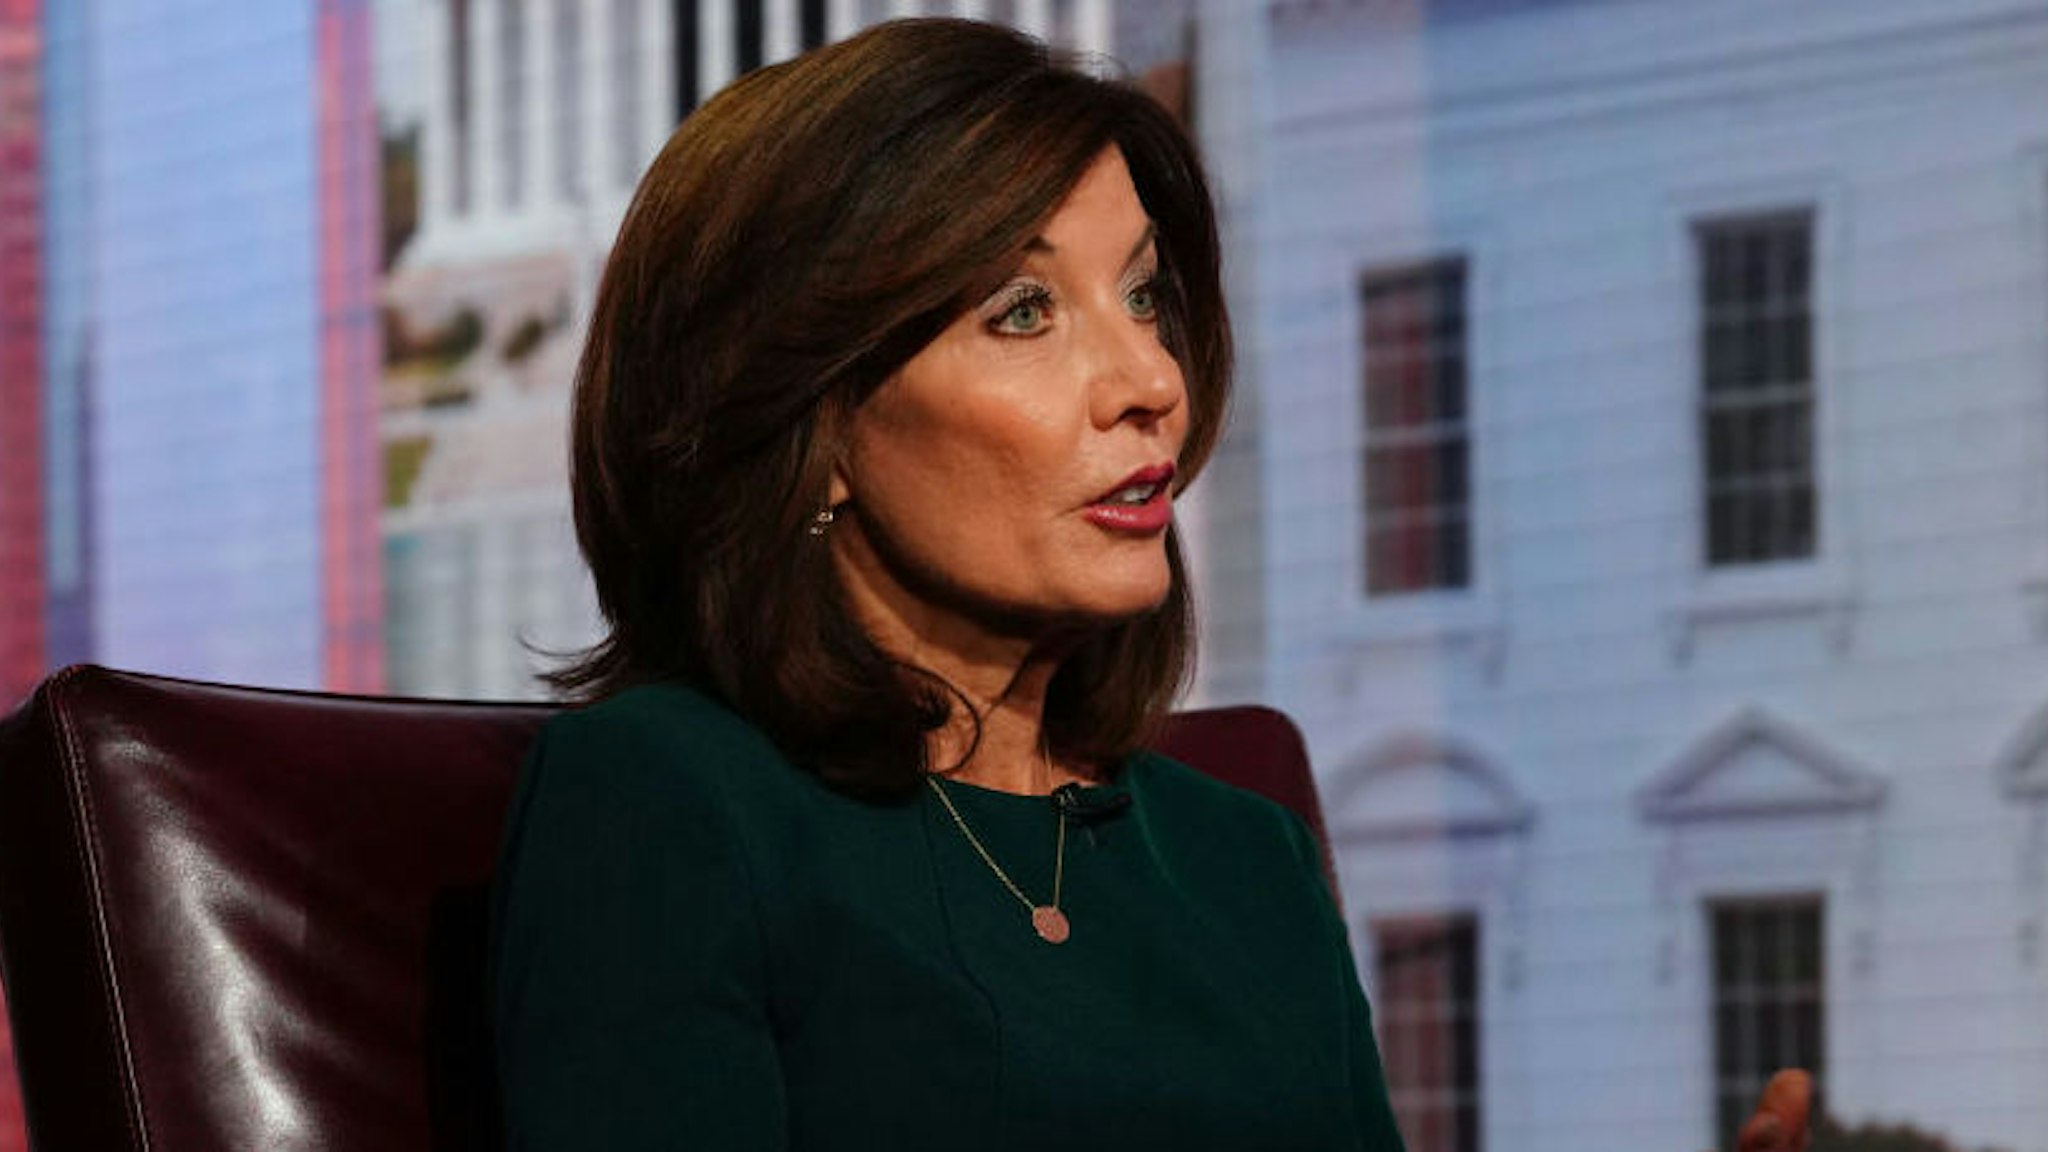 Kathy Hochul, lieutenant governor of New York, speaks during a Bloomberg Television interview in New York, U.S., on Thursday, Dec. 12, 2019. Hochul discussed her role in transforming the state's economy.